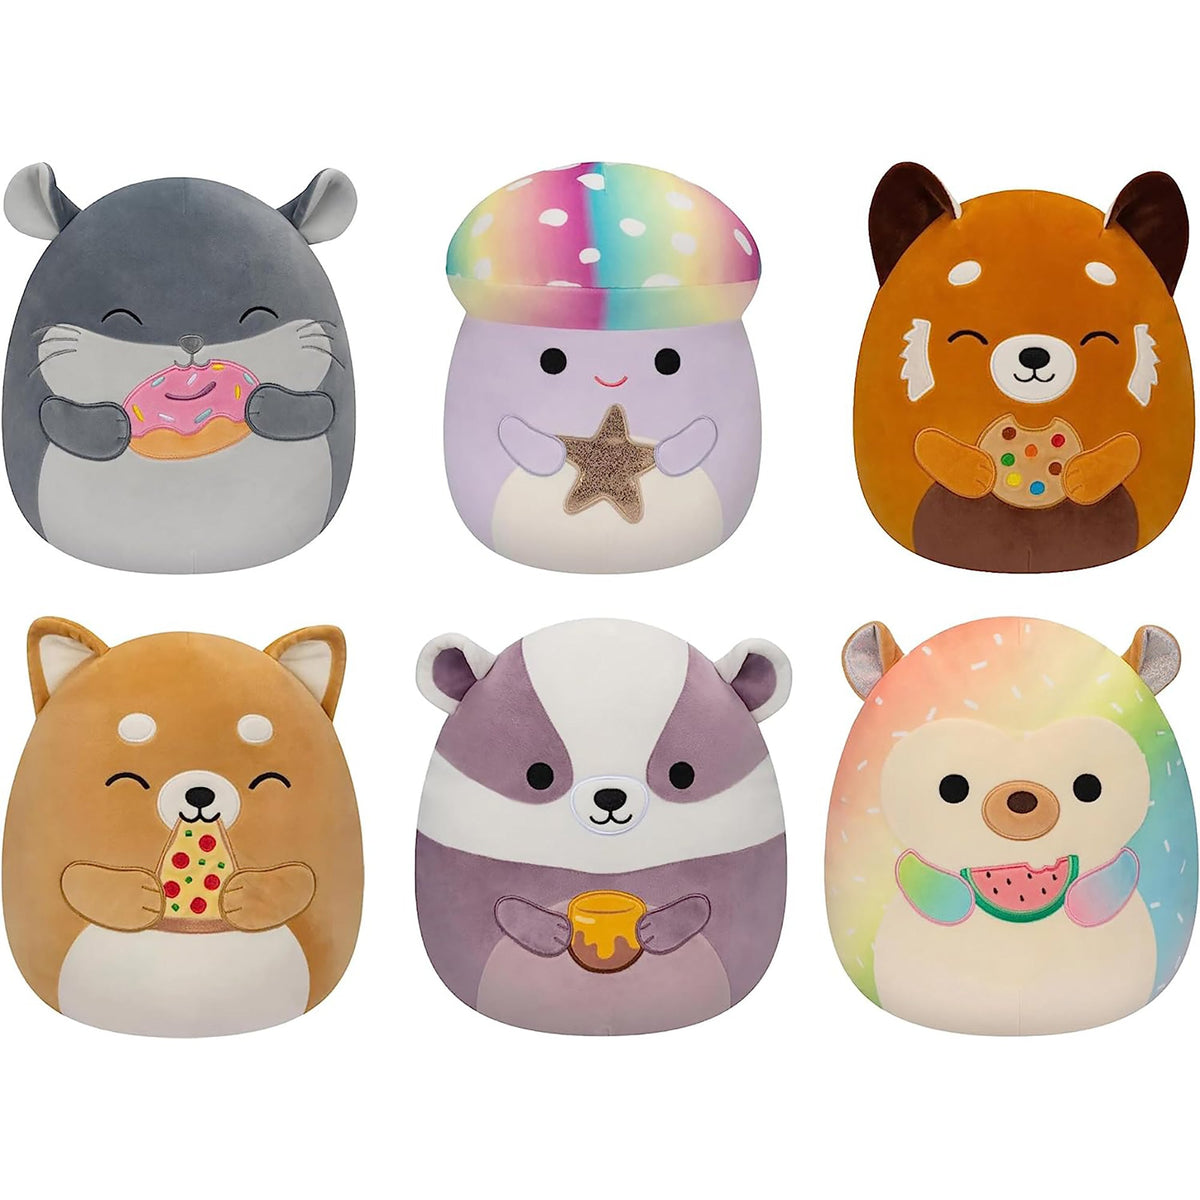 ROYAL SPECIALTY SALES Plushes I Got That Squishmallow Plush, 5 Inches, Assortment, 1 Count 196566209480